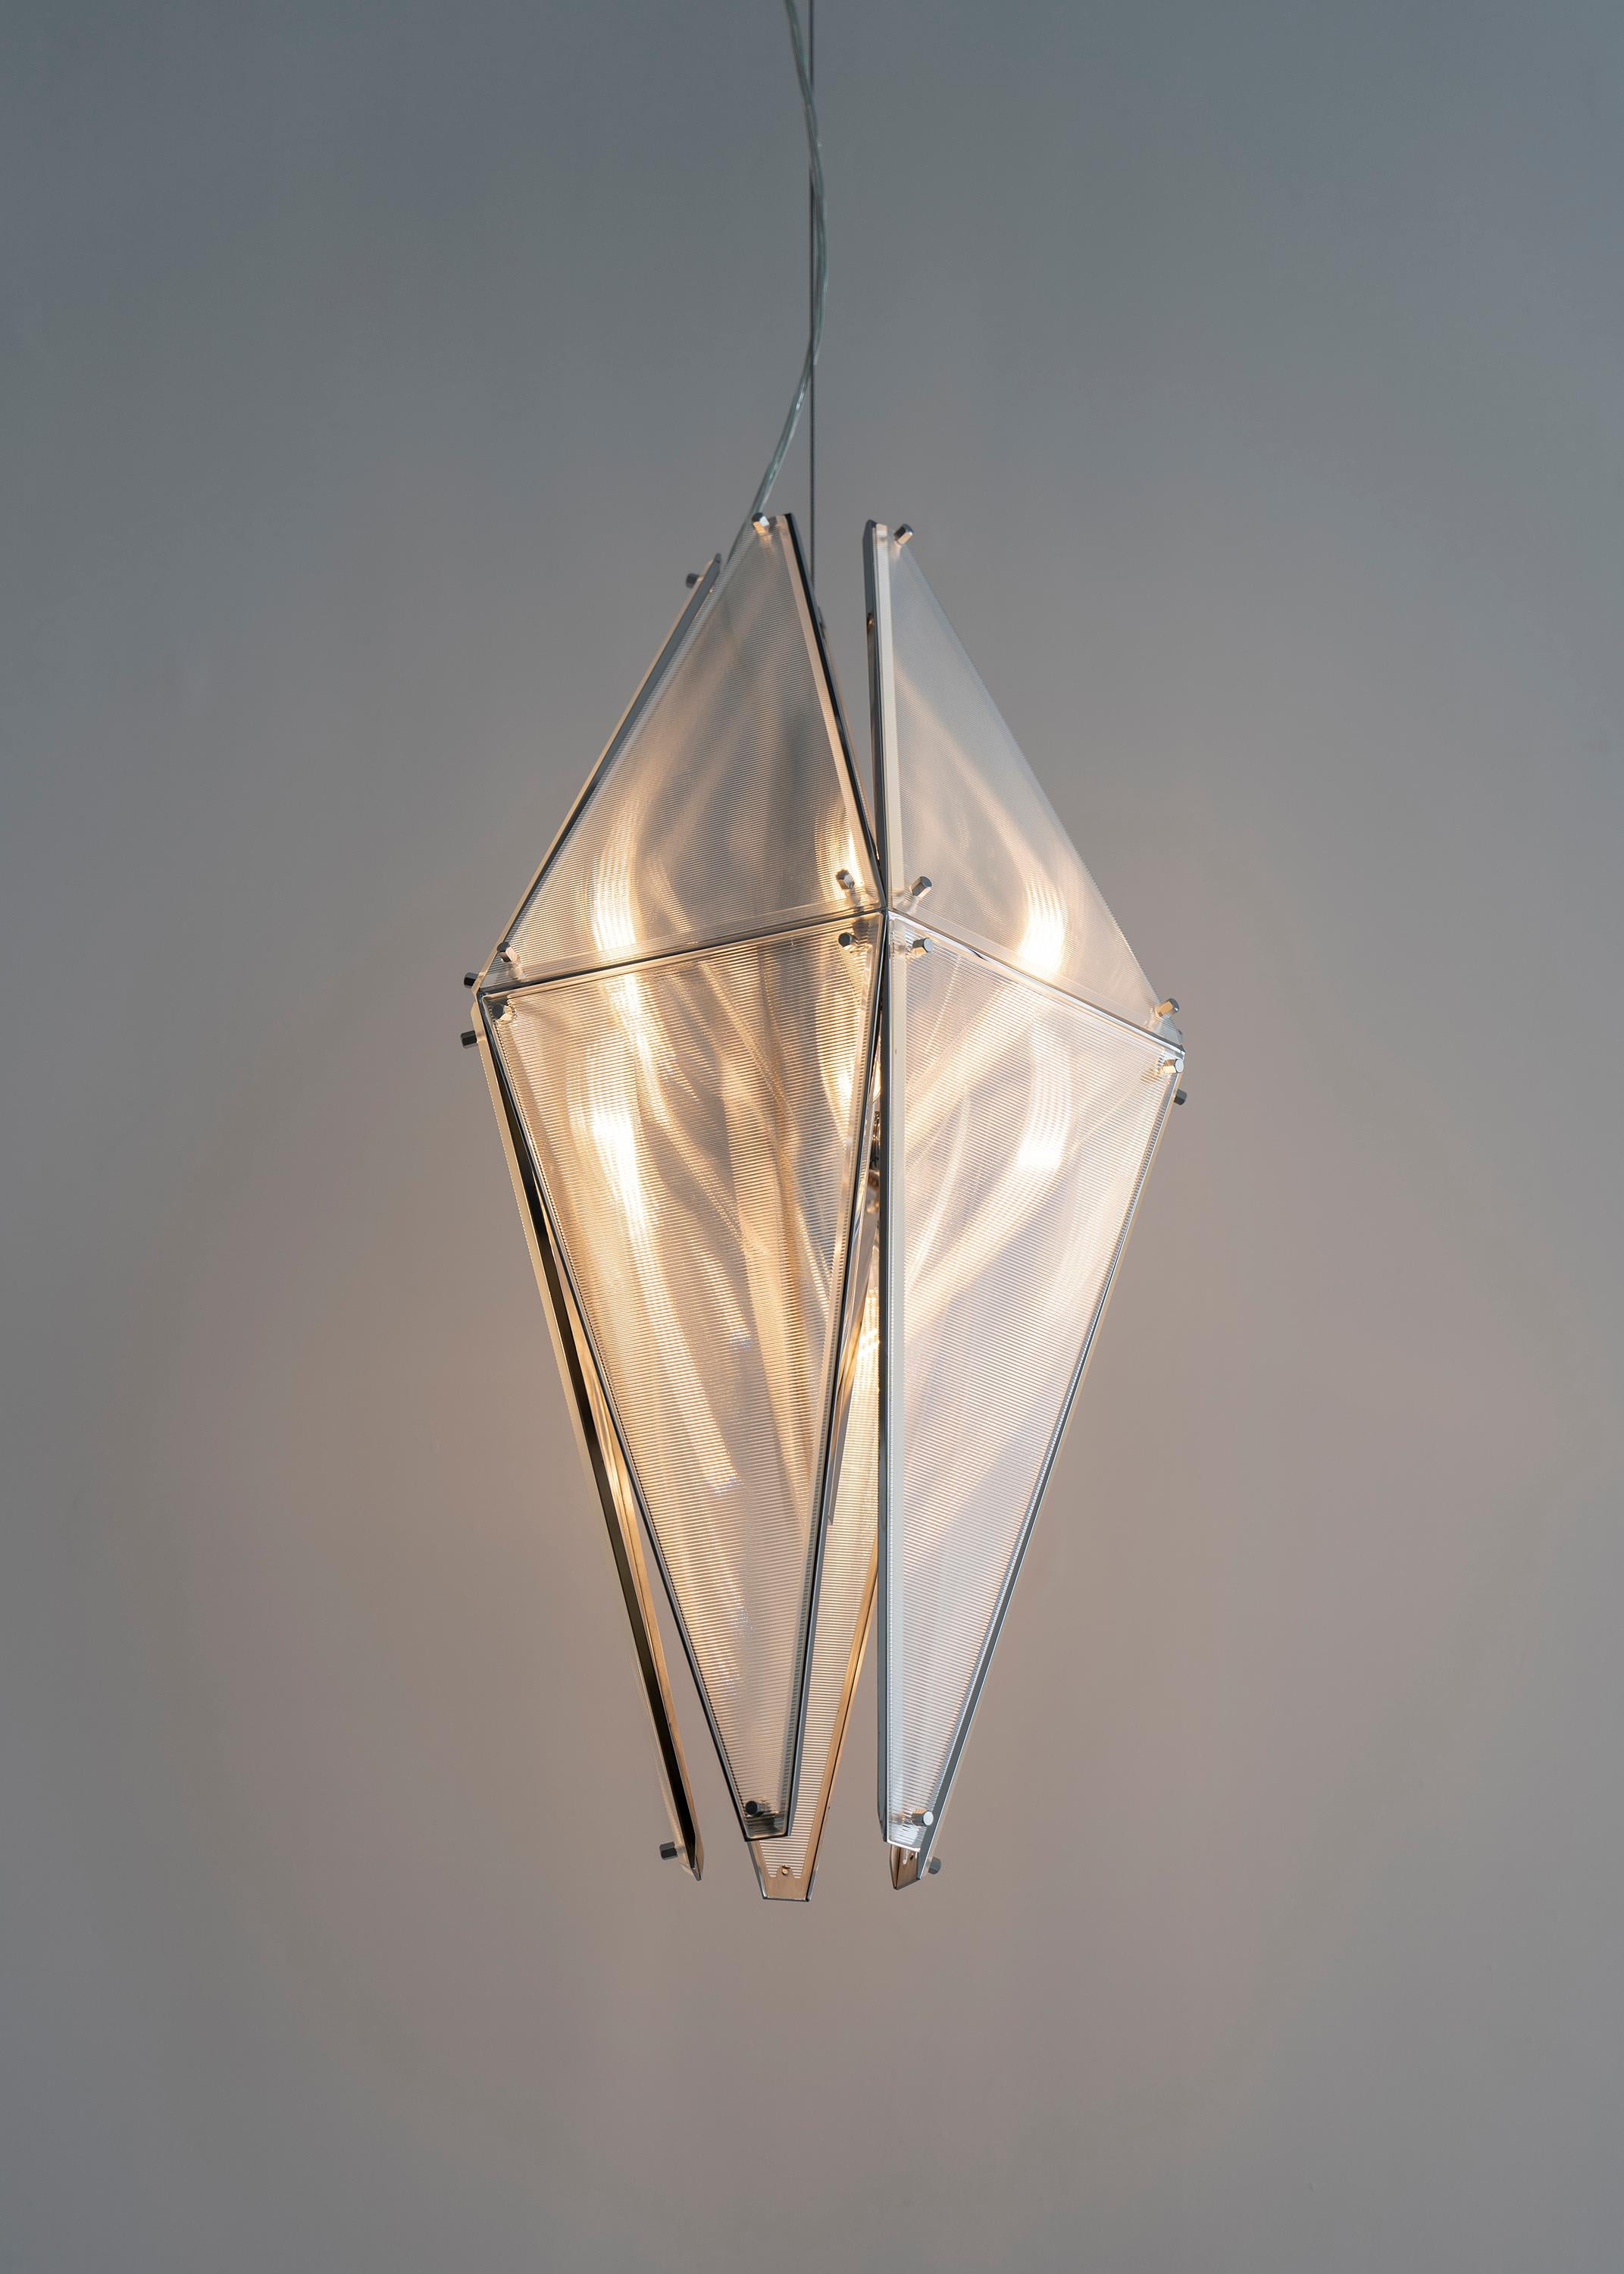 Fragment 08 pendant light by Sing Chan Design.
Dimensions: D 35.5 x H 70.5 cm
Materials: Stainless steel, glass.

All our lamps can be wired according to each country. If sold to the USA it will be wired for the USA for instance.

The past and